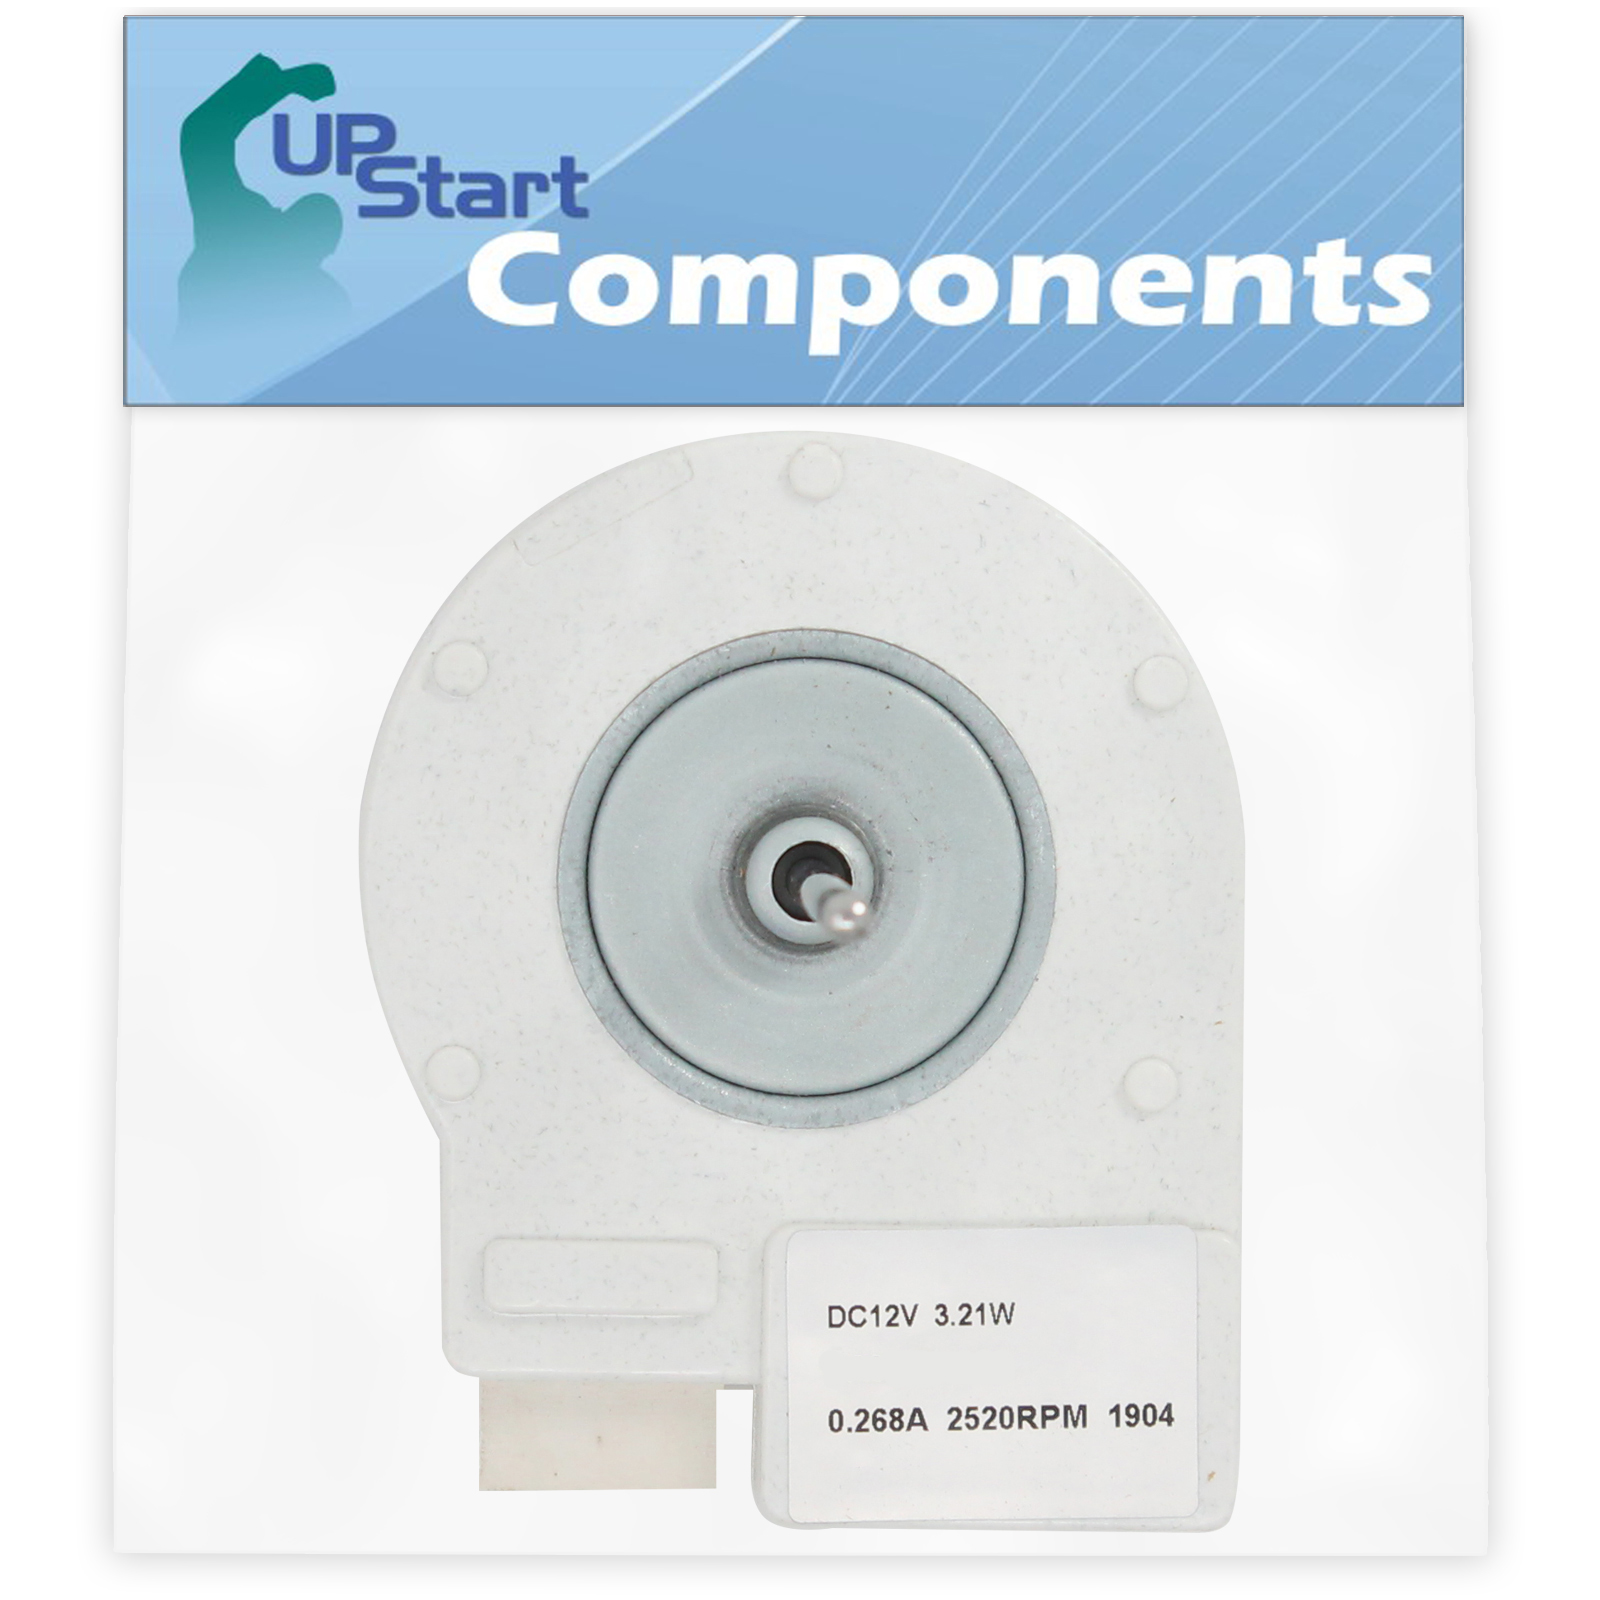 DA31-00146E Evaporator Fan Motor Replacement for Samsung RFG295AARS/XAA-0000 Refrigerator - Compatible with DA31-00146E Fan Motor - UpStart Components Brand - image 1 of 4